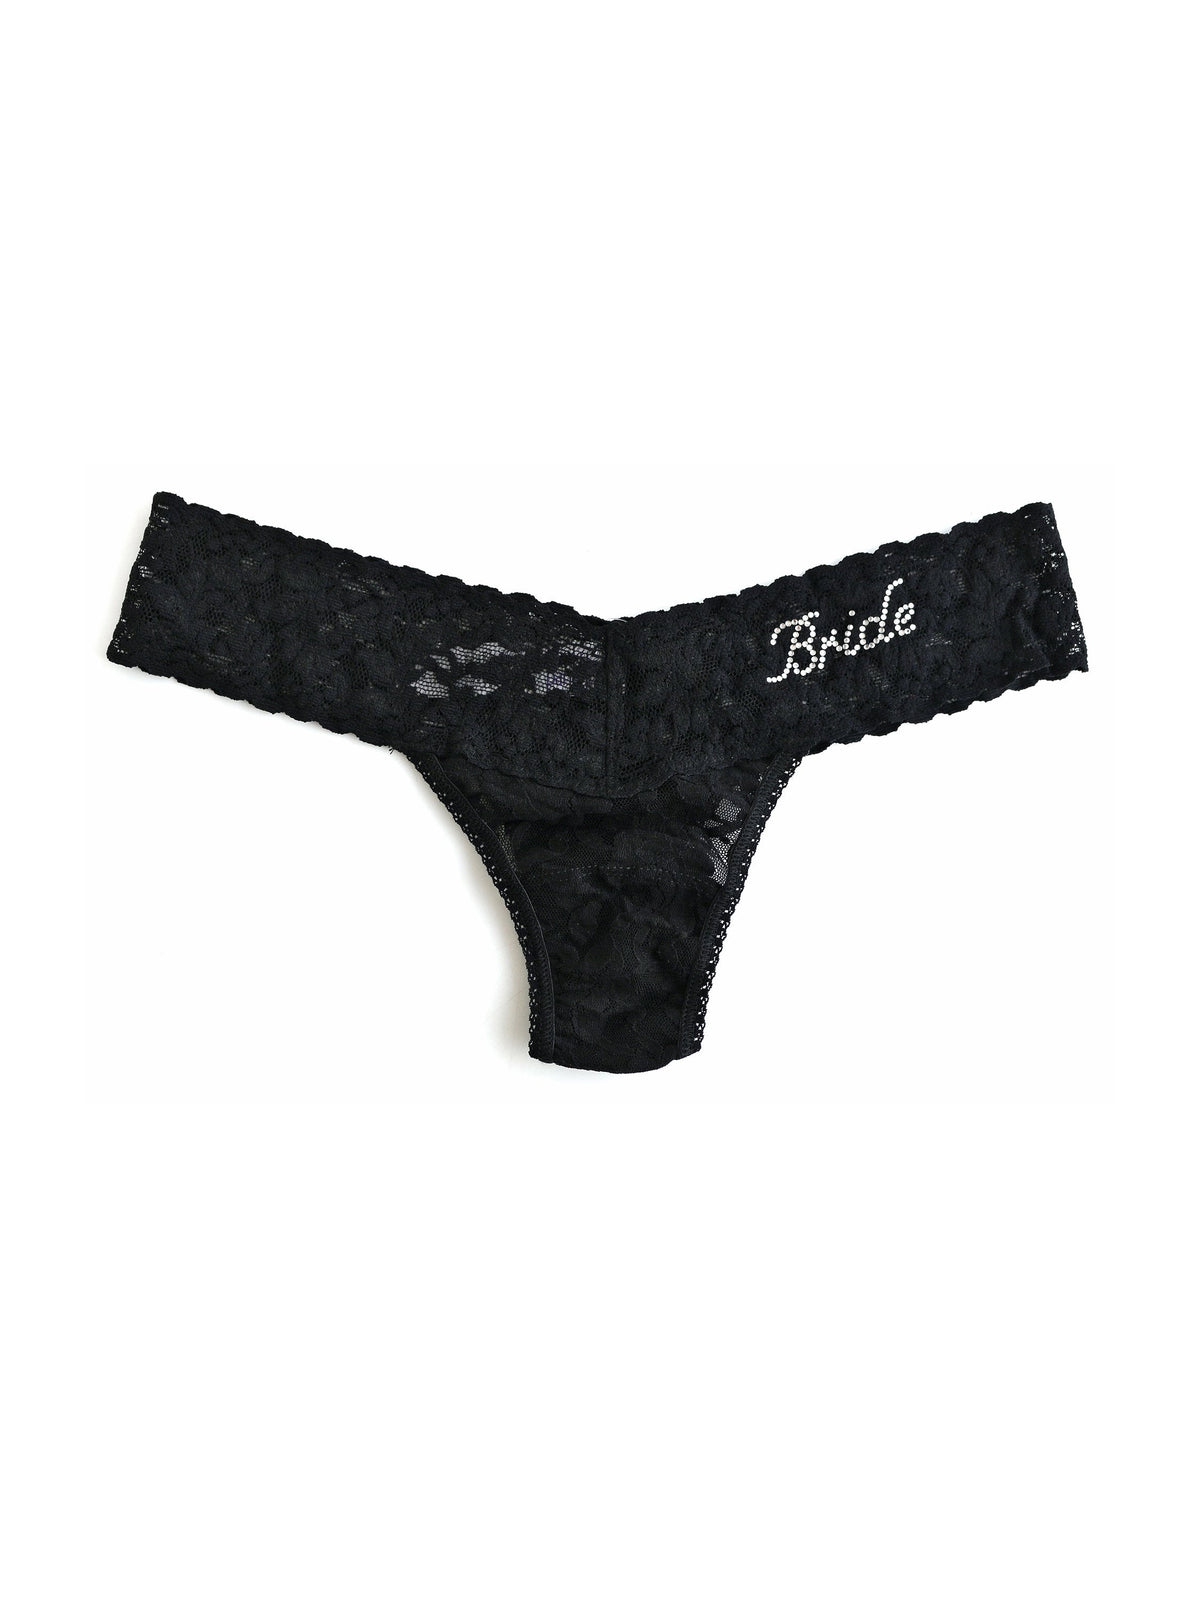 Bride Crystal Signature Lace Low Rise Thong-BLACK-Hanky Panky